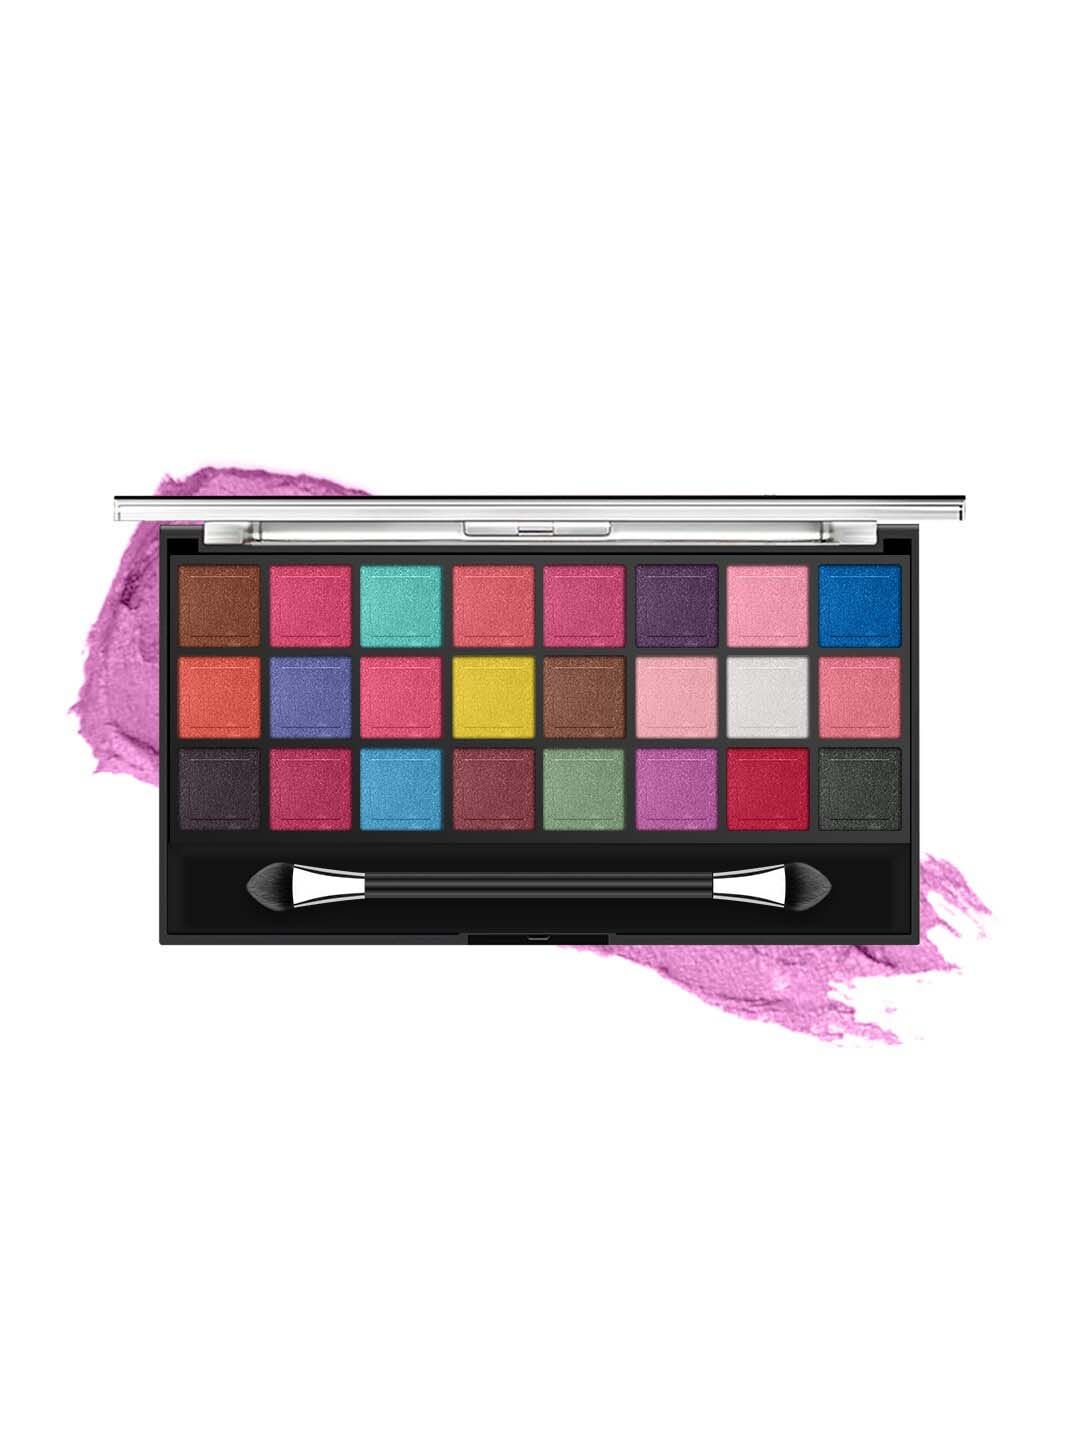 MISS ROSE Metalic 24 Color Matte Eyeshadow Palette 7001-071 MT02 Price in India